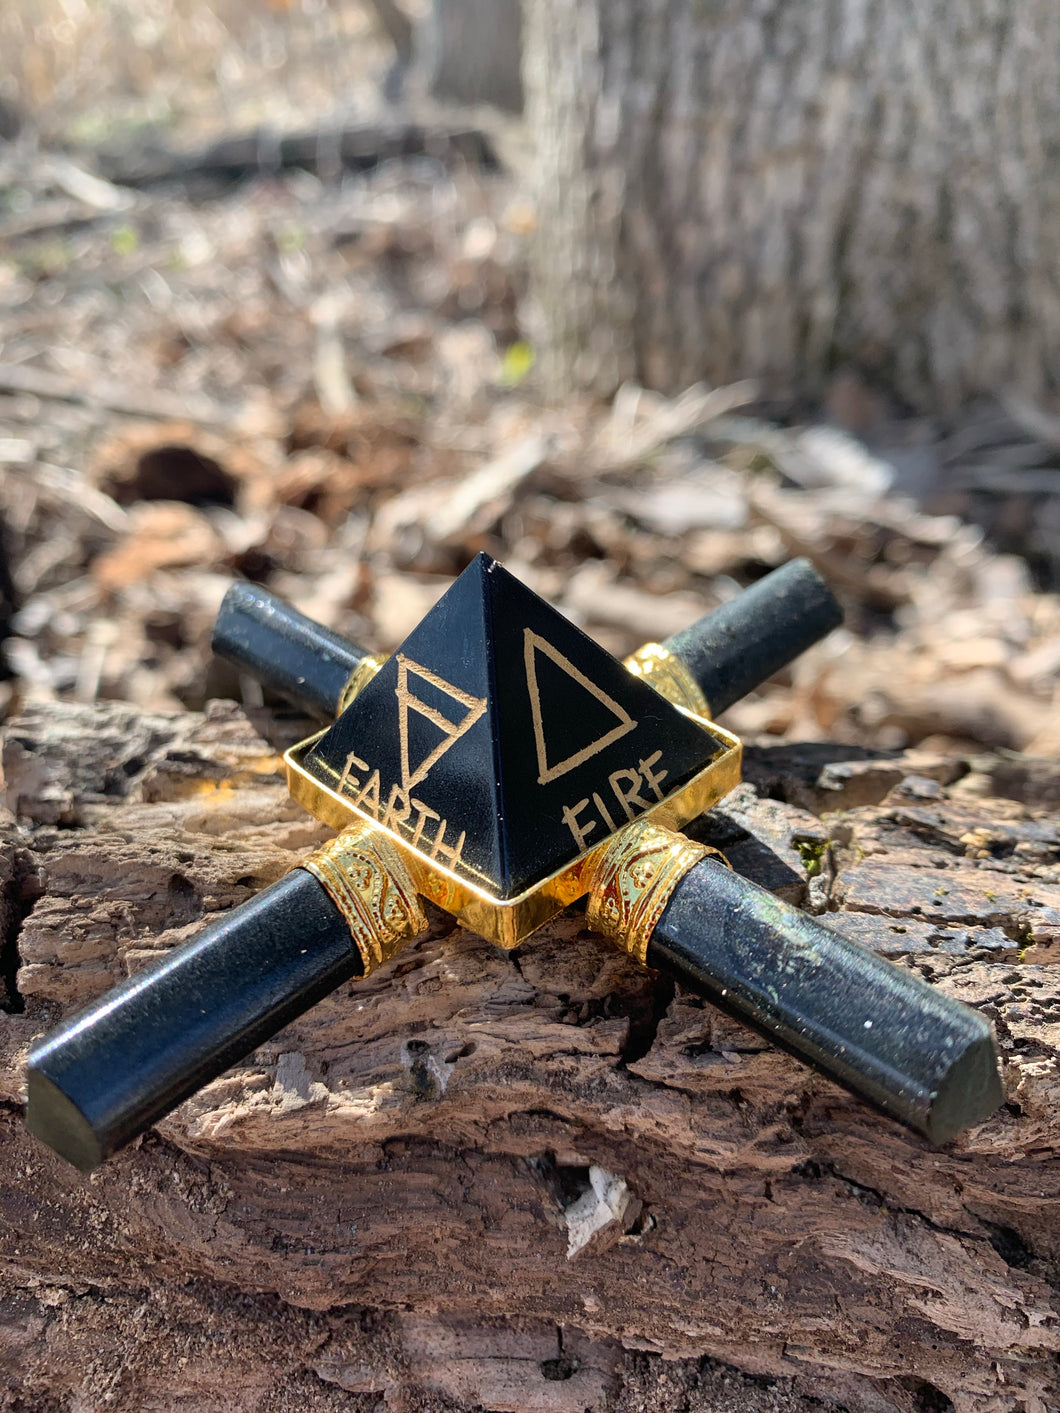 Jet Black Tourmaline 4 Point Gold Plated Pyramid Generator 5 Elements Engraved Air Water Earth Fire Star Crystal Point Gemstone